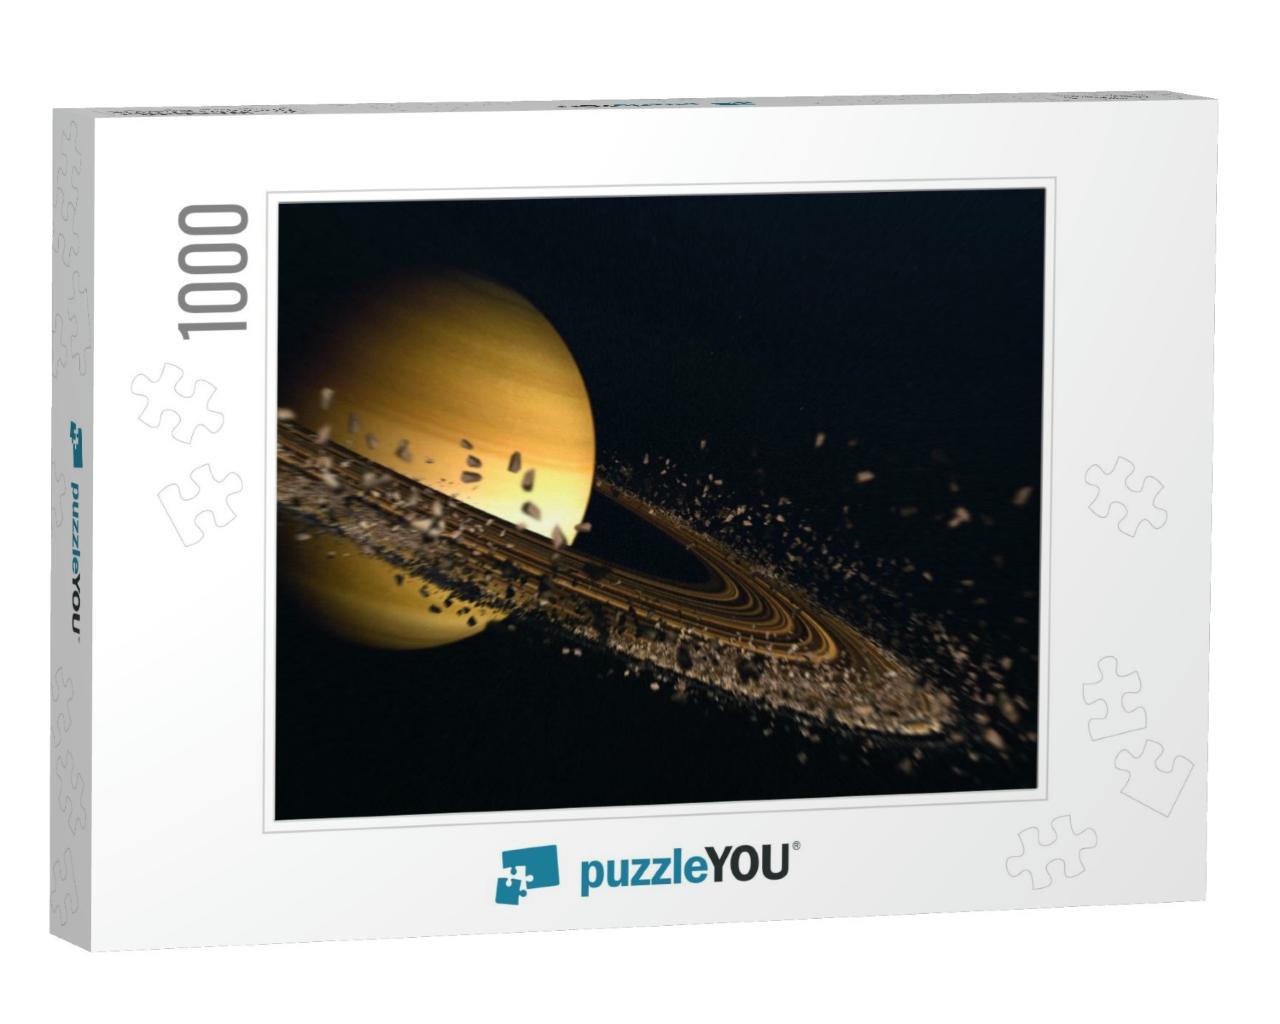 Saturn Rings Explosion 3D Illustration 3D Rendering... Jigsaw Puzzle with 1000 pieces